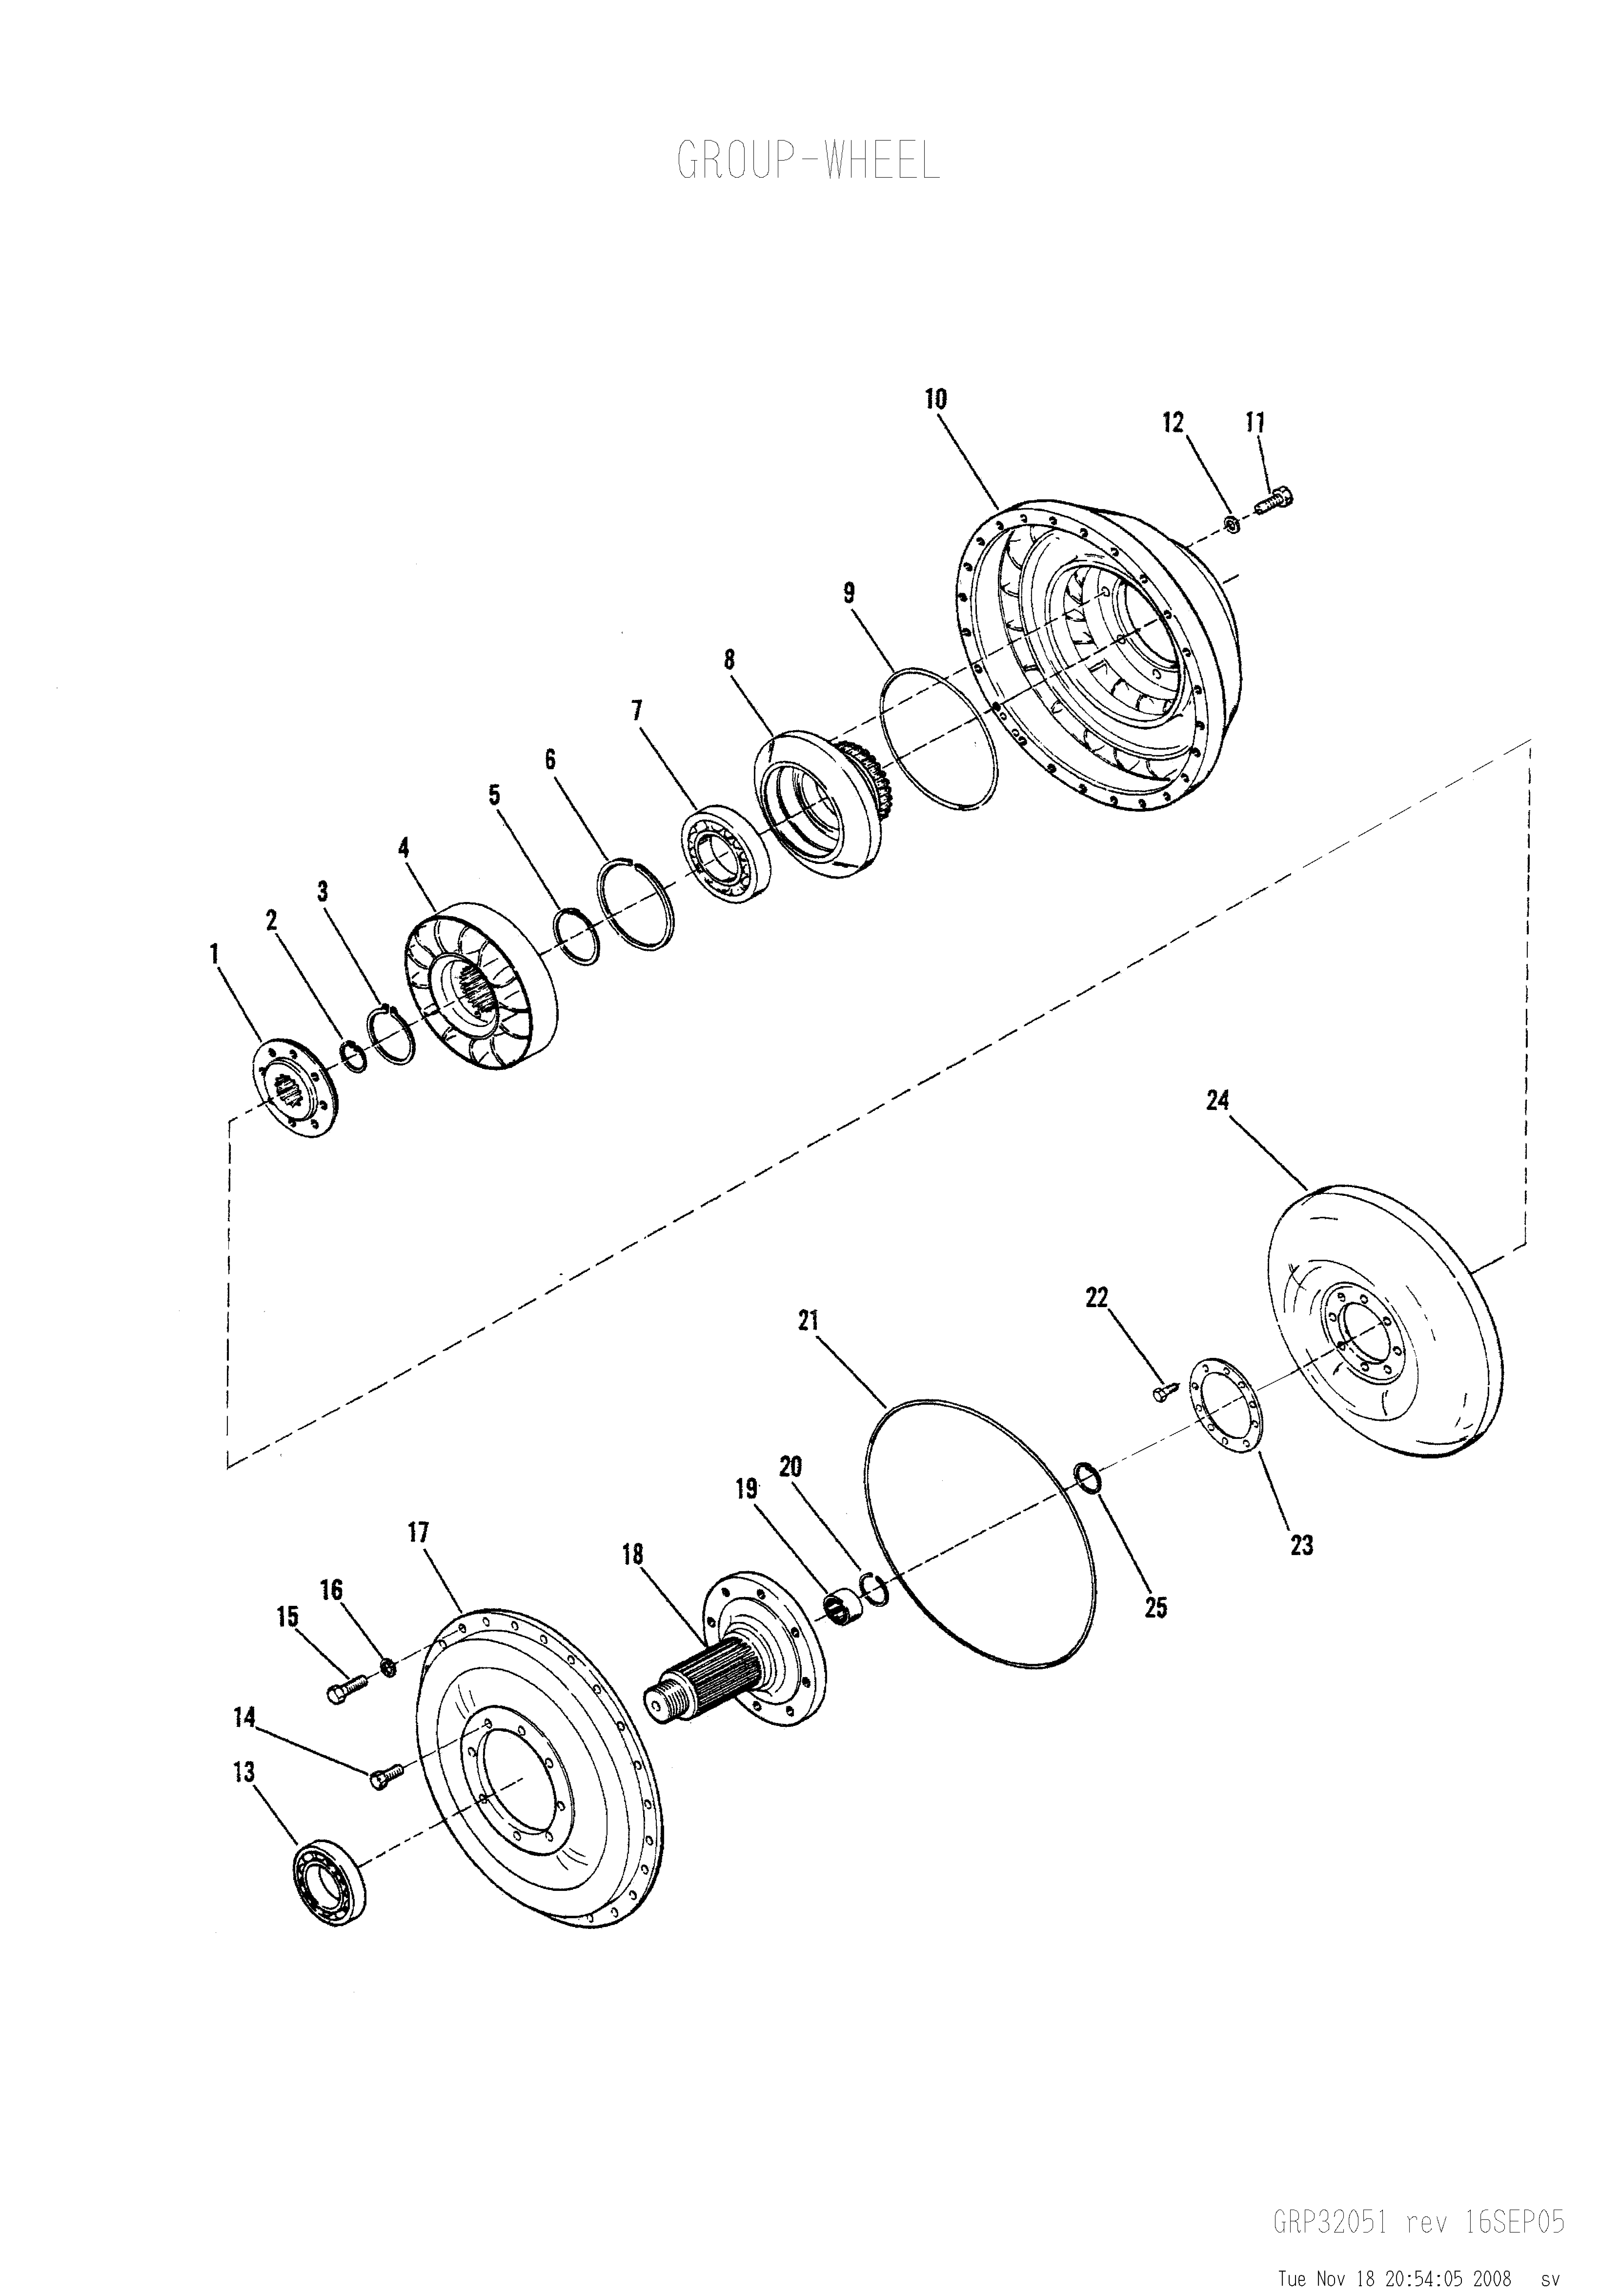 drawing for NACCO GROUP 0330557 - RING (figure 5)